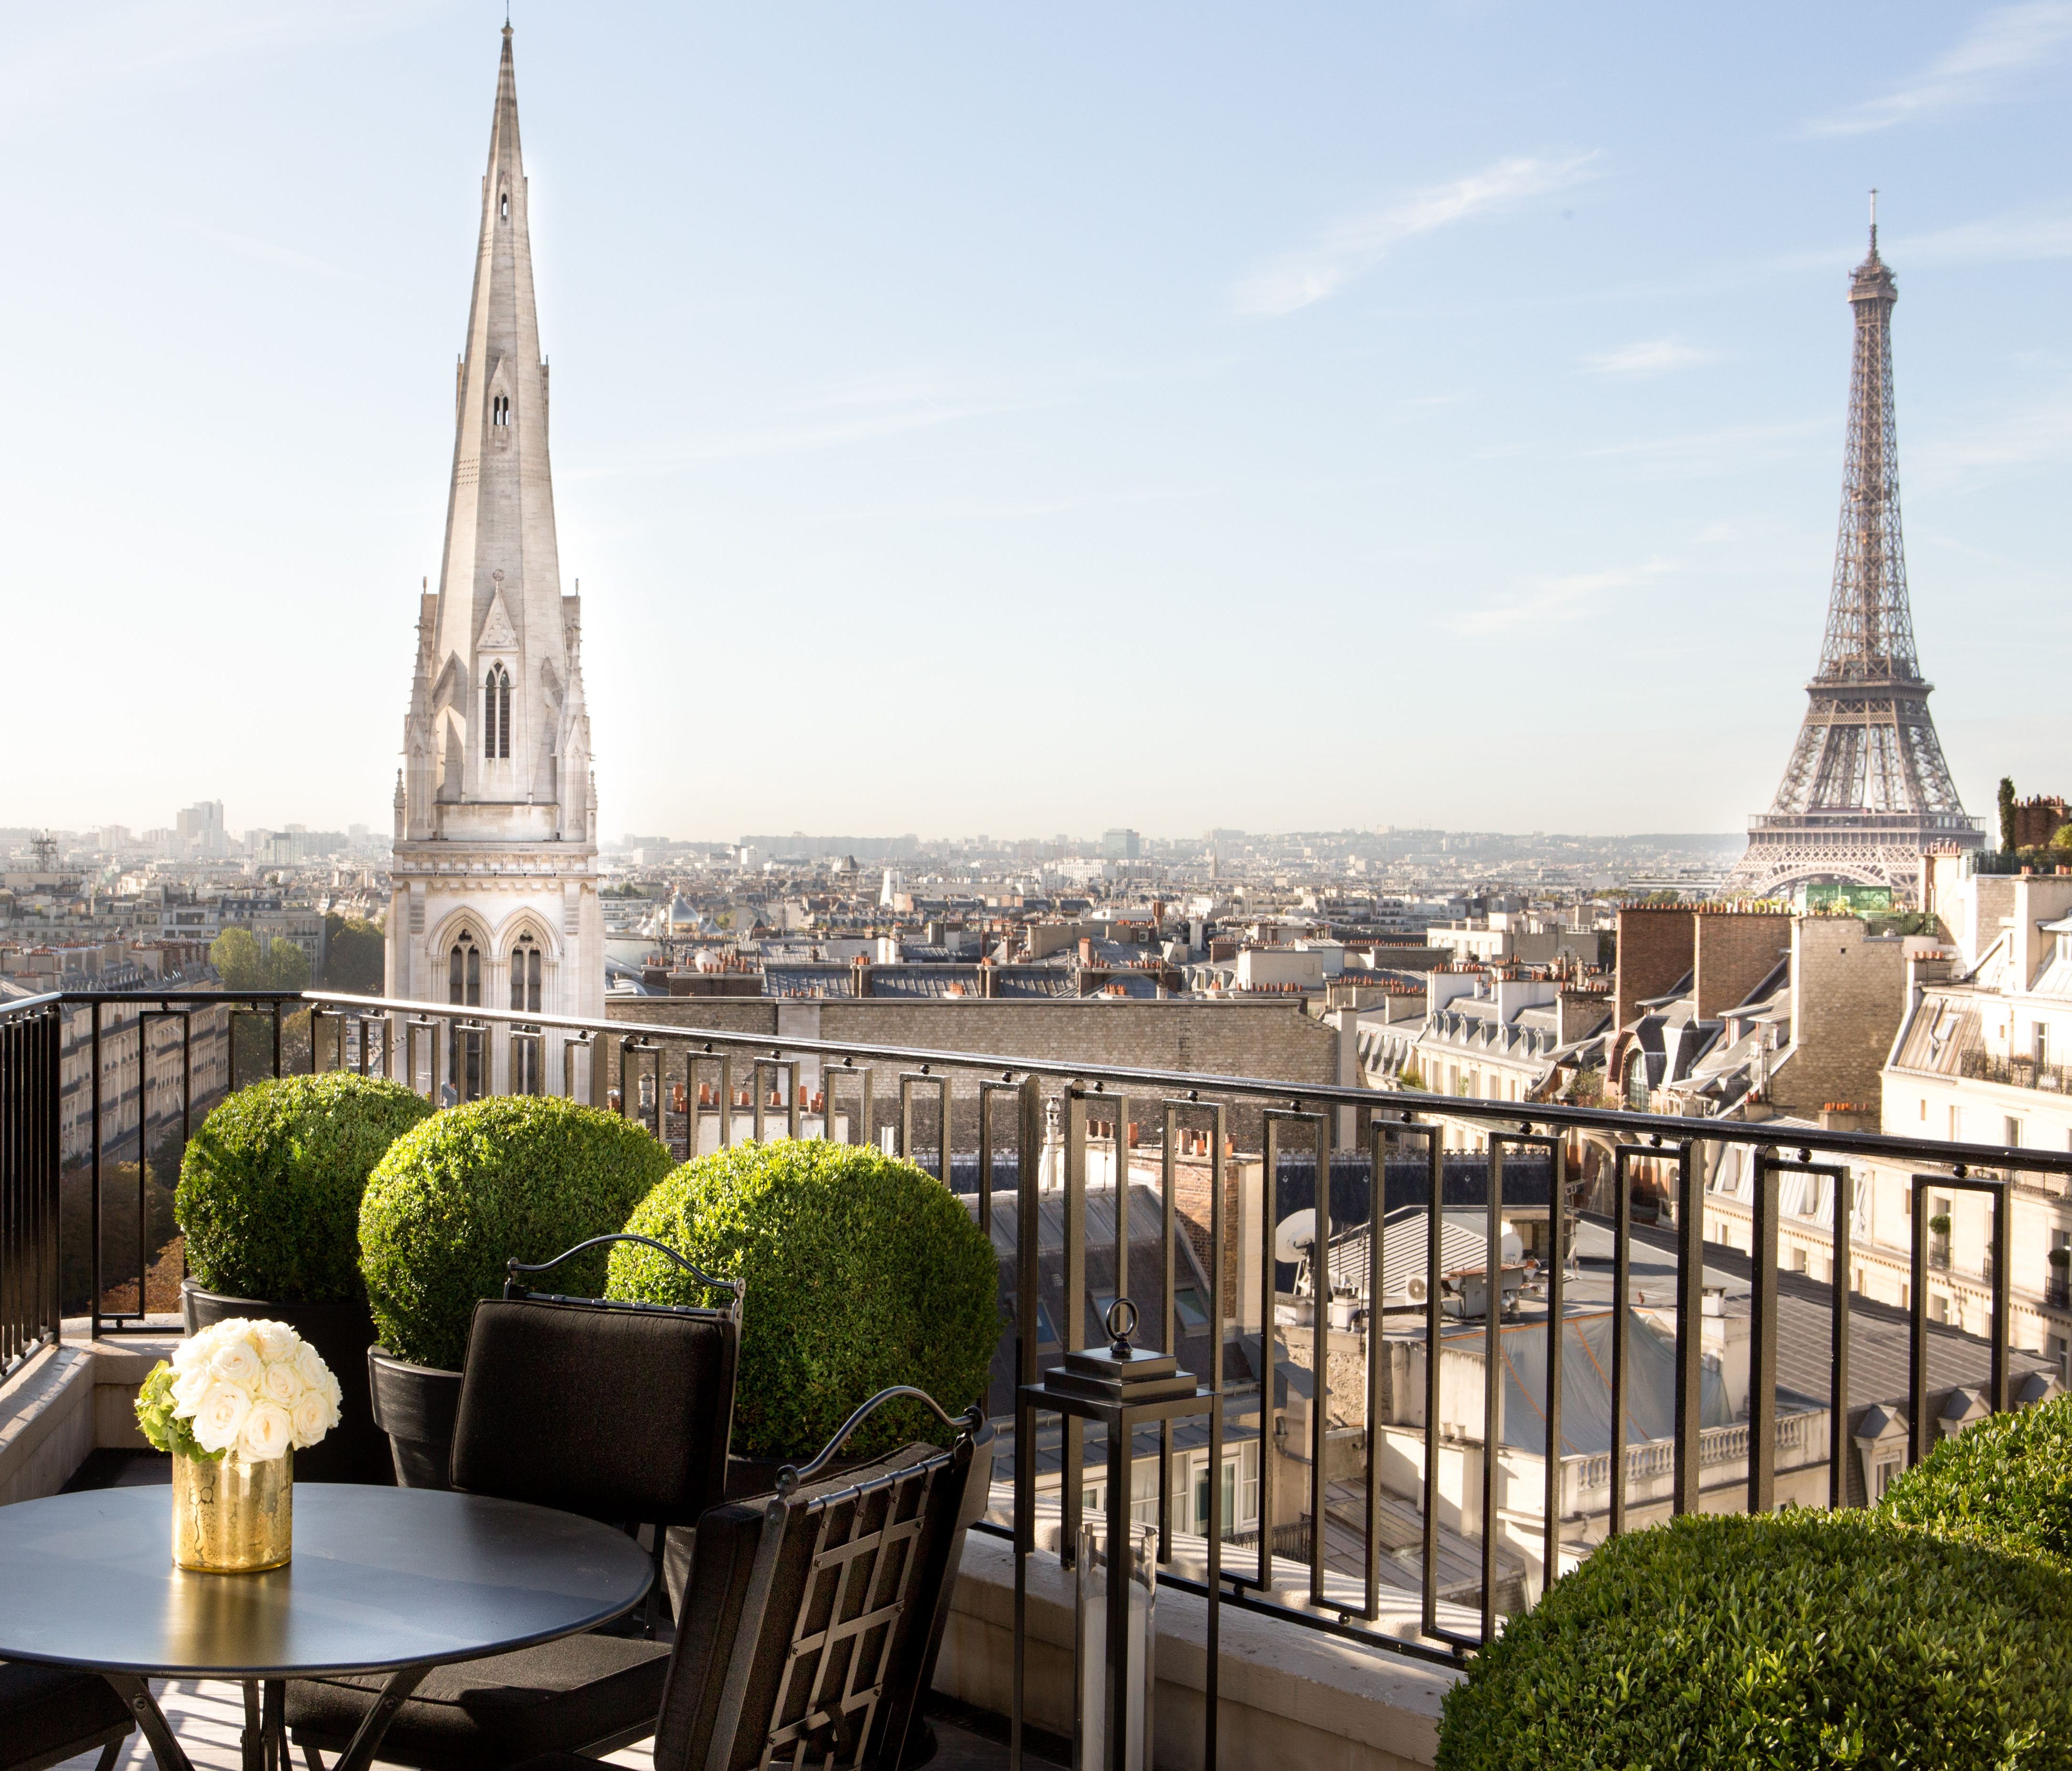 Among the most exclusive of Parisian hotels, the Four Seasons George V is known for welcoming celebrities aplenty, especially in the Penthouse Suite with amazing views from perhaps the best hotel terrace in town. For the privilege, expect to fork ove